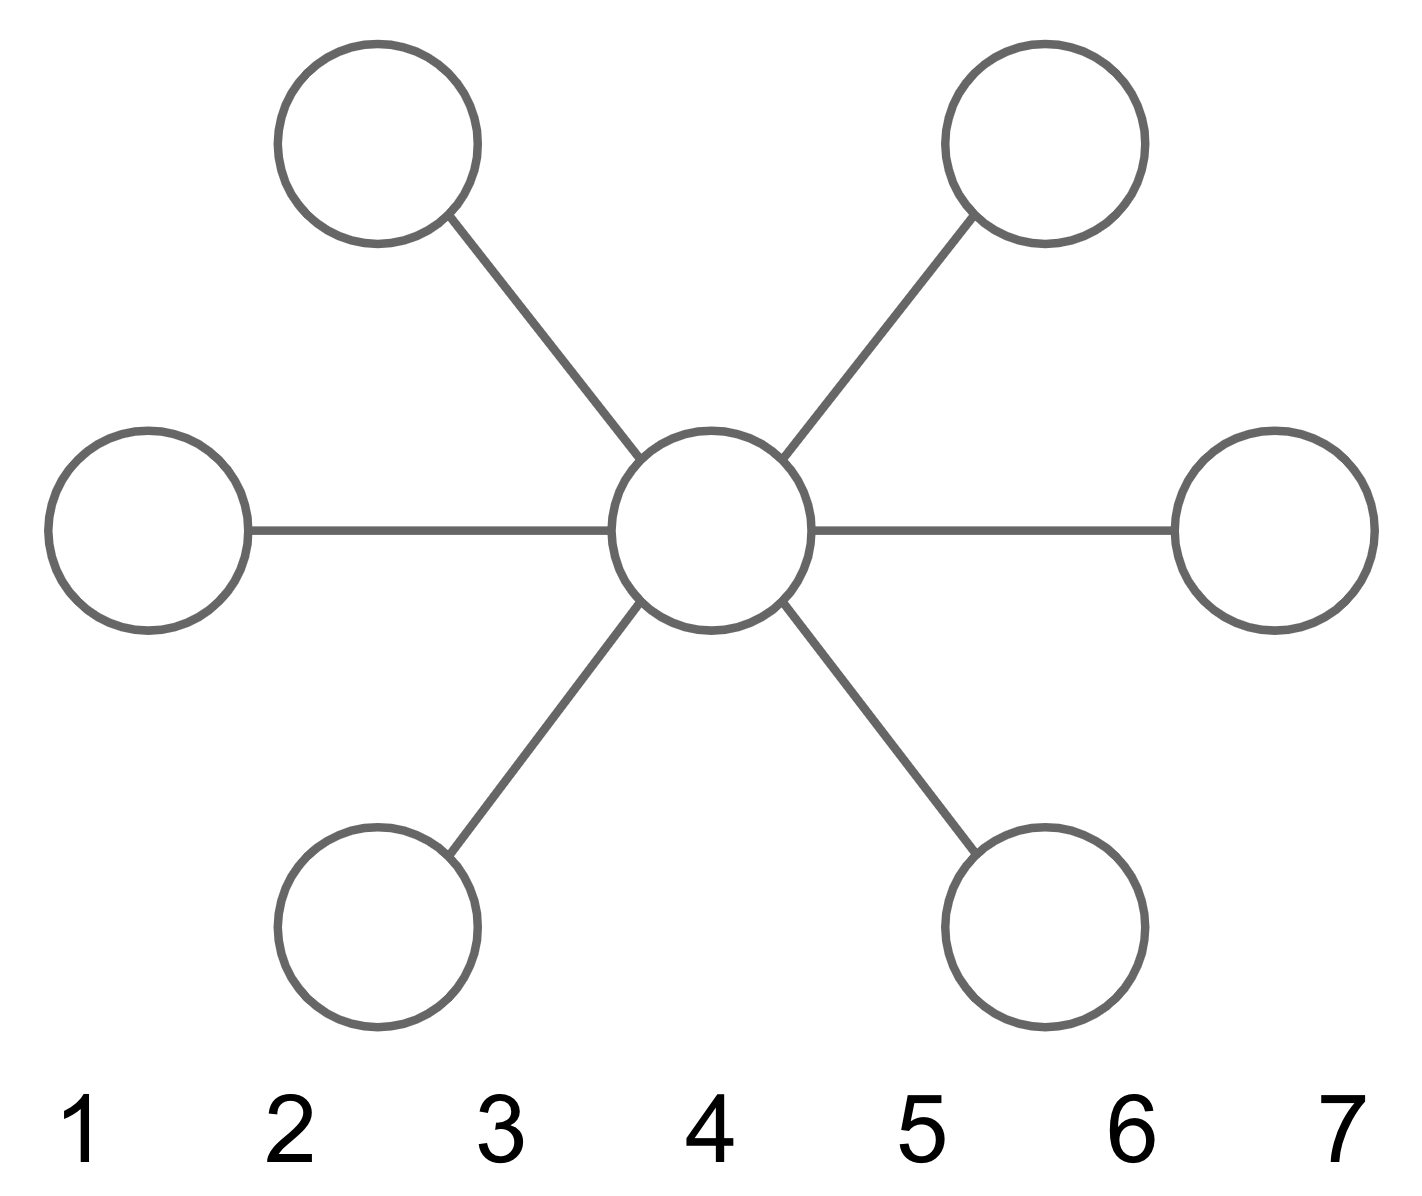 A line image of a circle, surrounded by six equally sized circles connected to the centre circle with lines. Number 1 to 7 are along the bottom of the image.